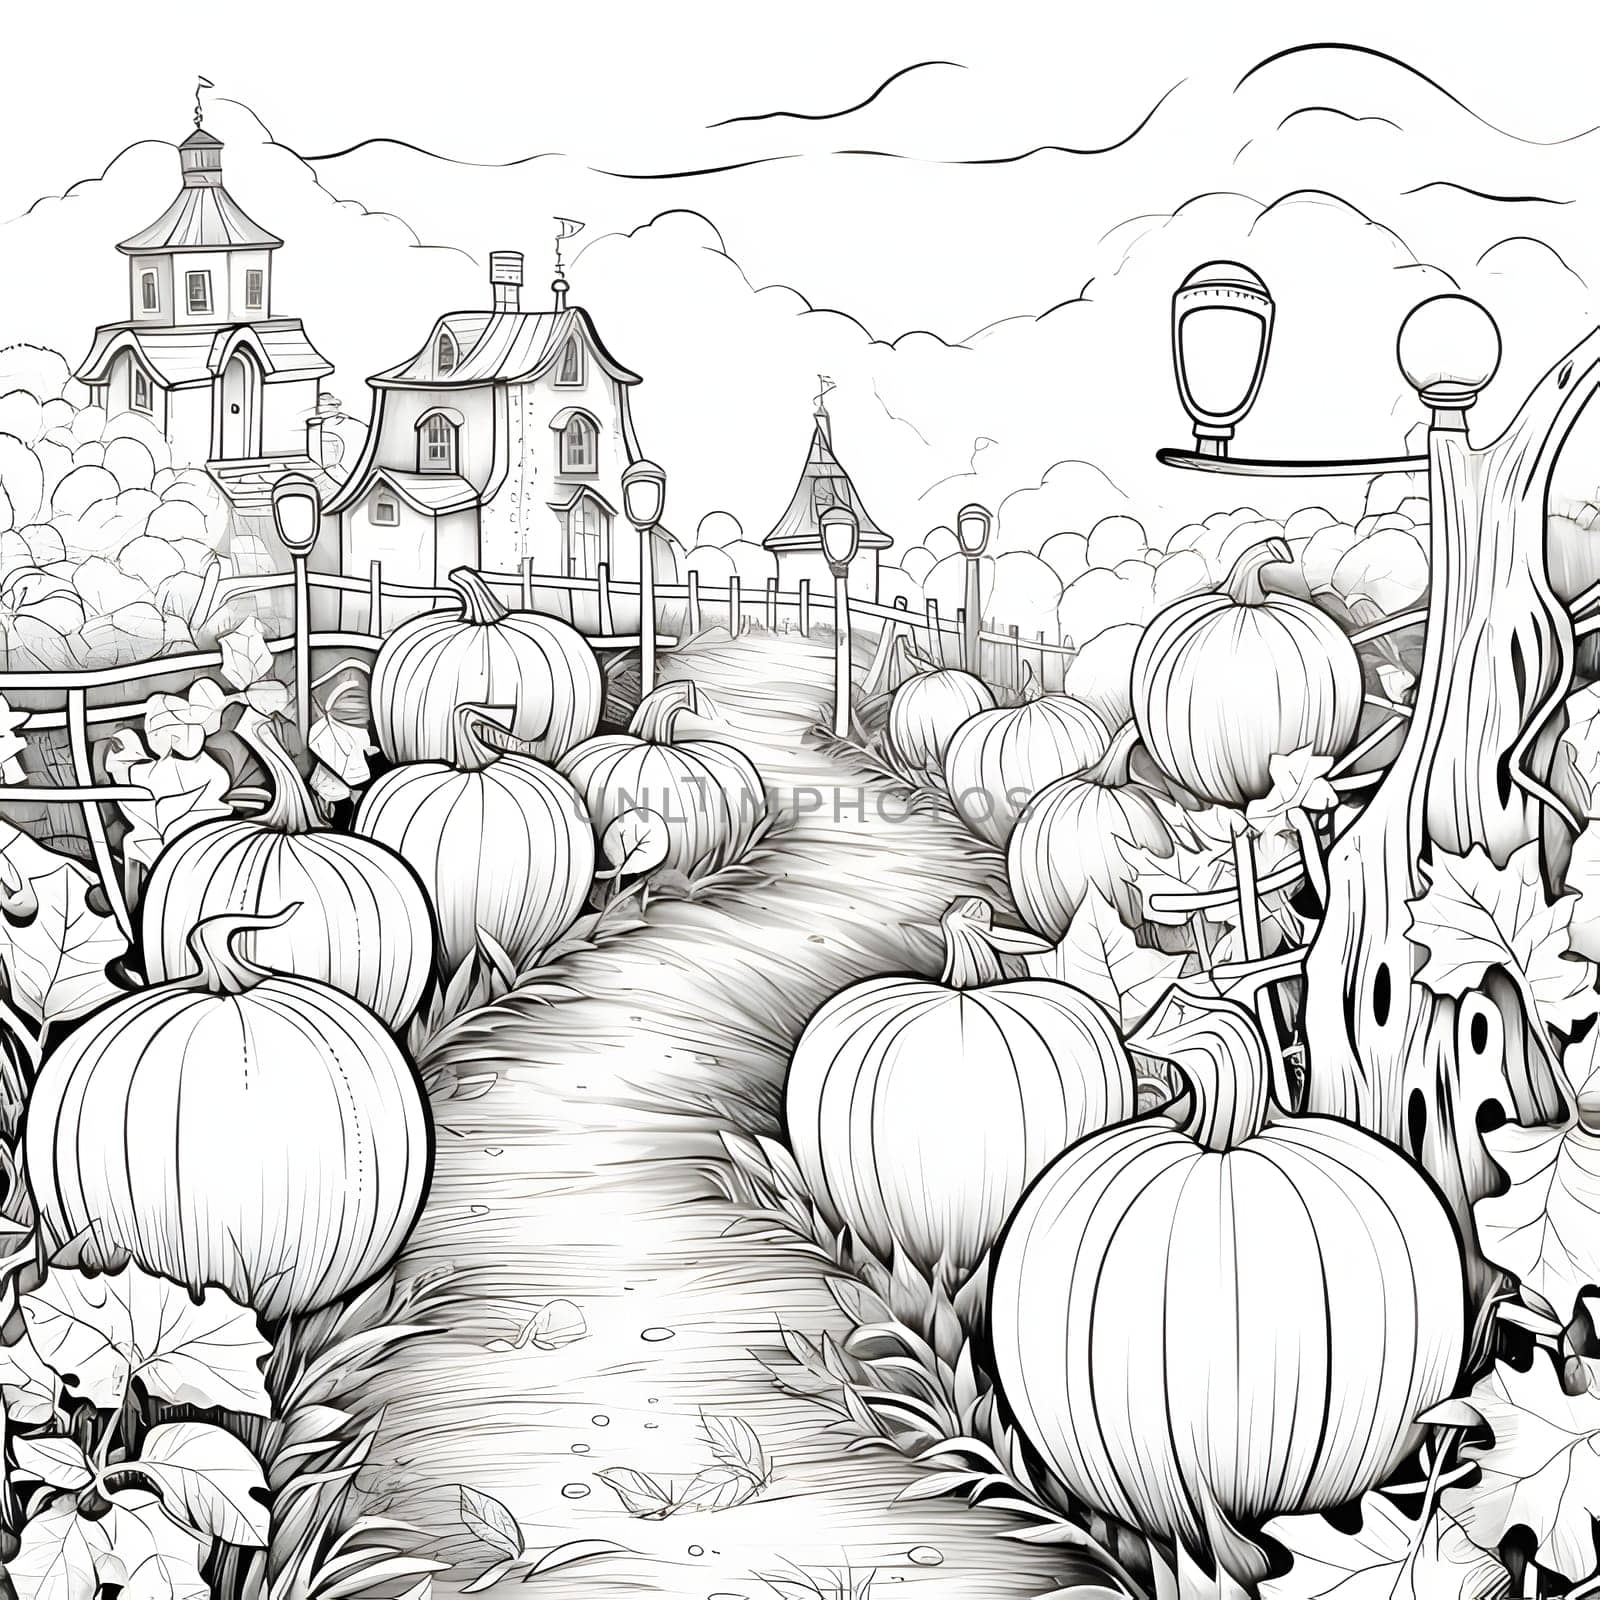 Black and white coloring book path to the mansion next to it pumpkins and leaves. Pumpkin as a dish of thanksgiving for the harvest, picture on a white isolated background. by ThemesS